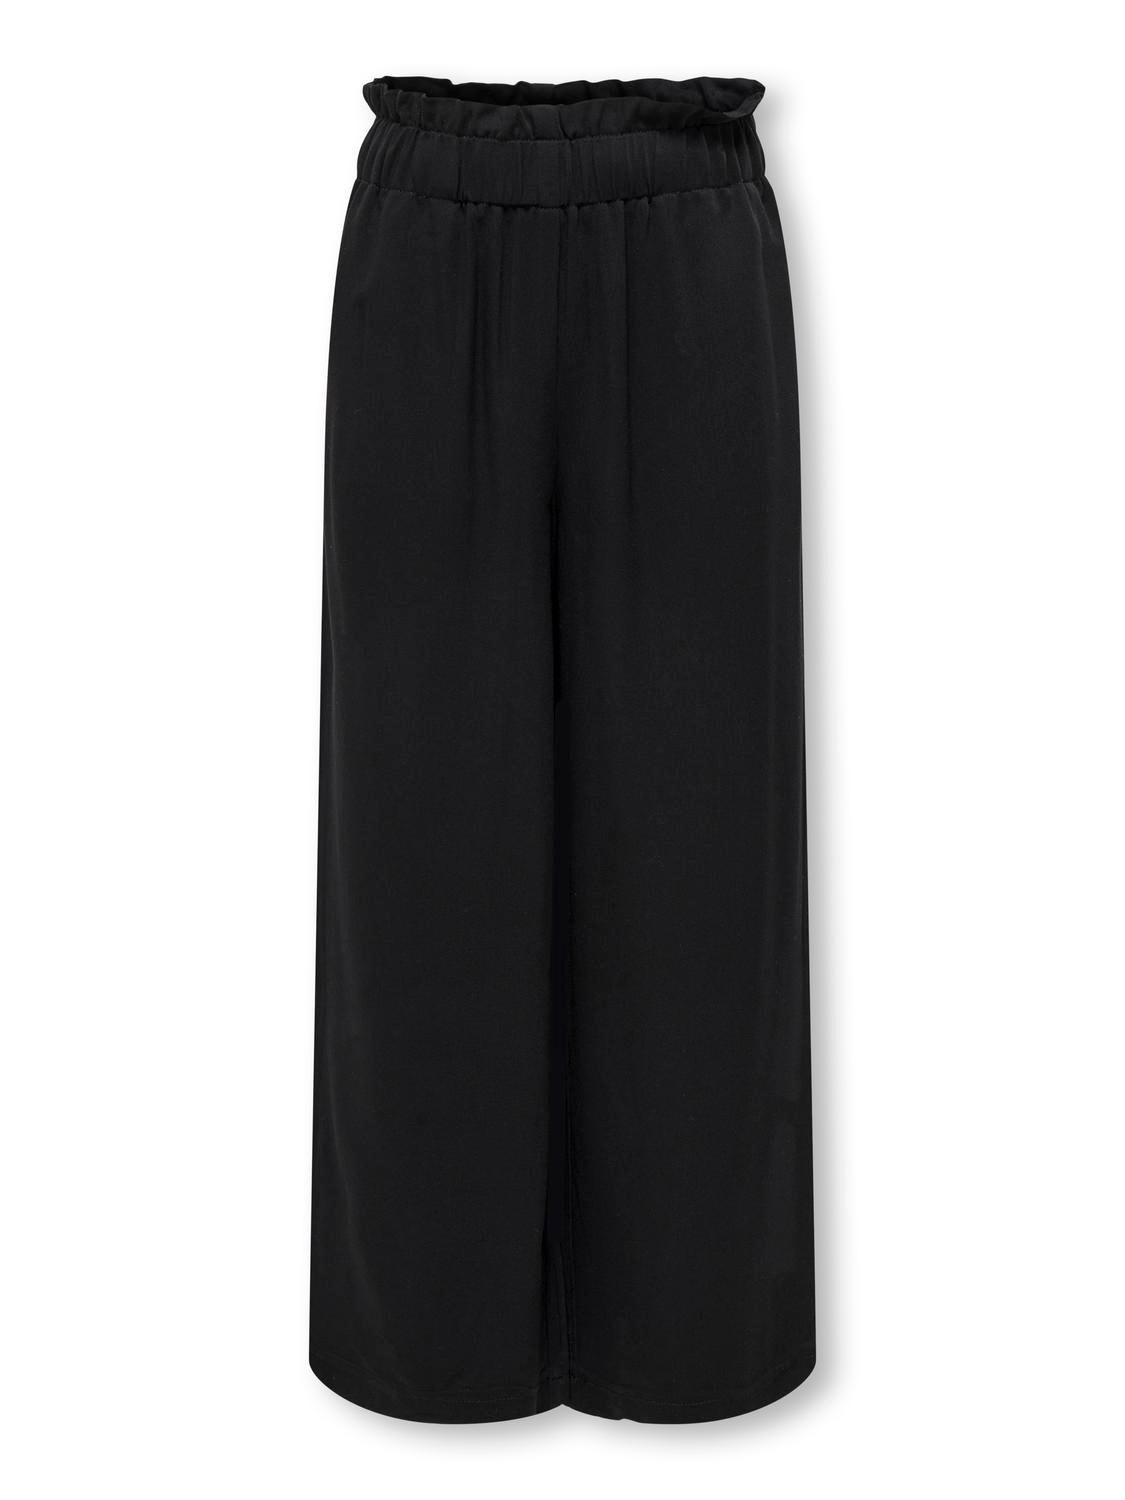 ONLY Trousers with elasticated waist -Black - 15260828